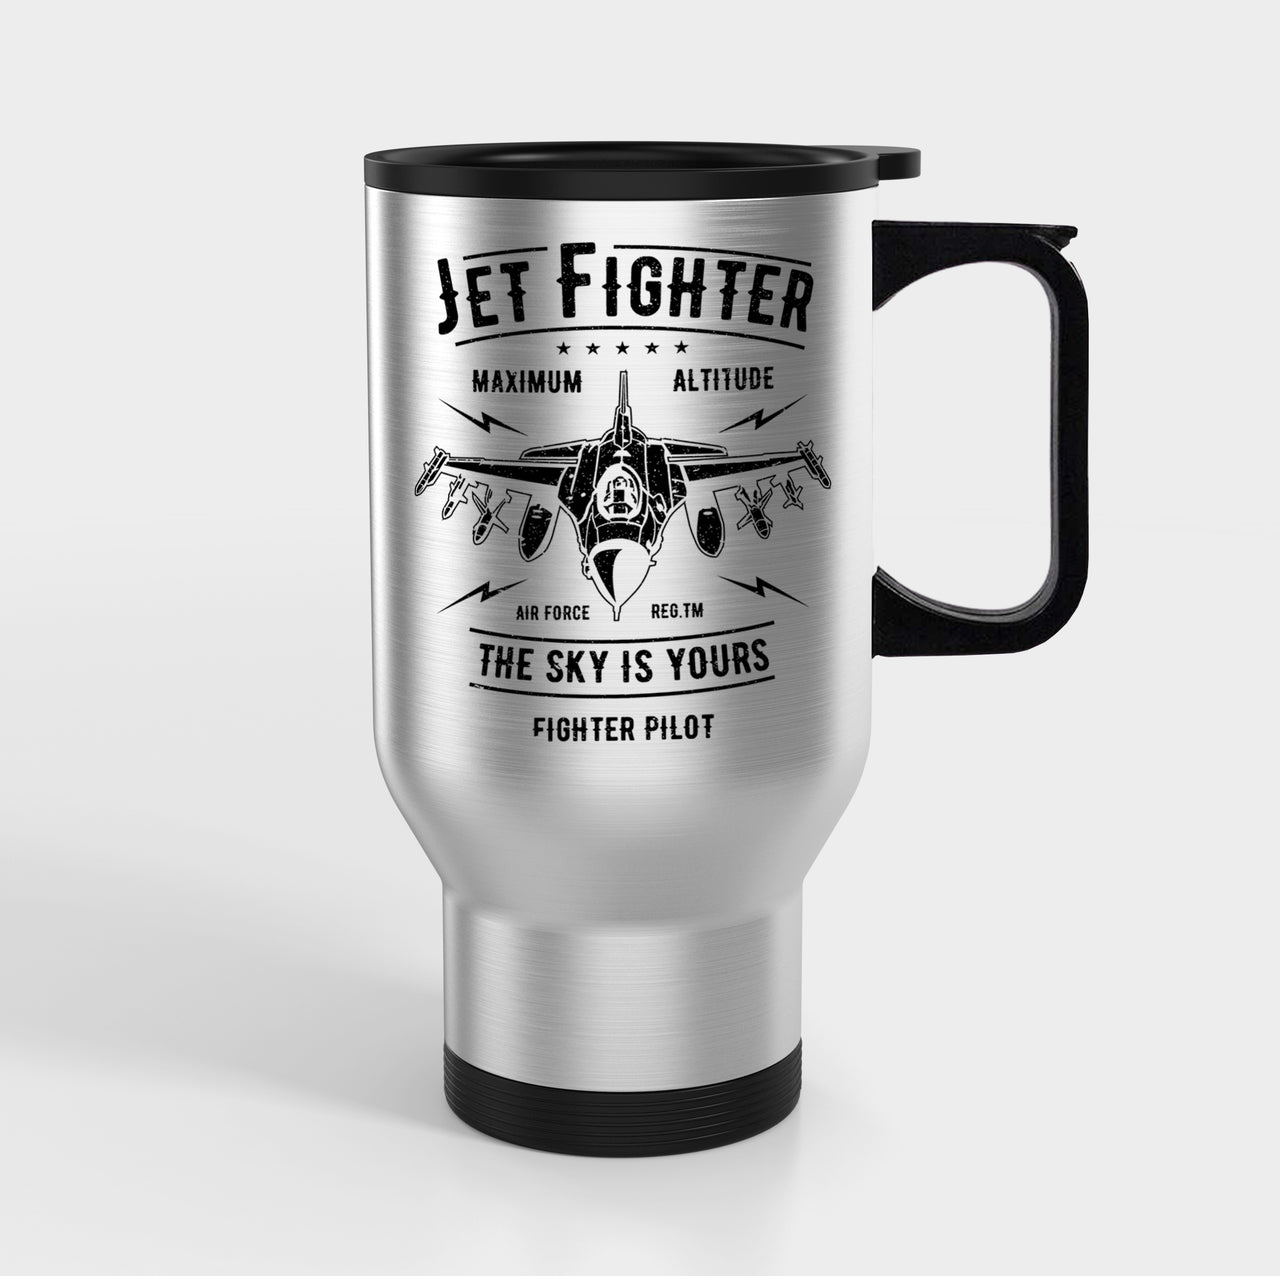 Jet Fighter - The Sky is Yours Designed Travel Mugs (With Holder)